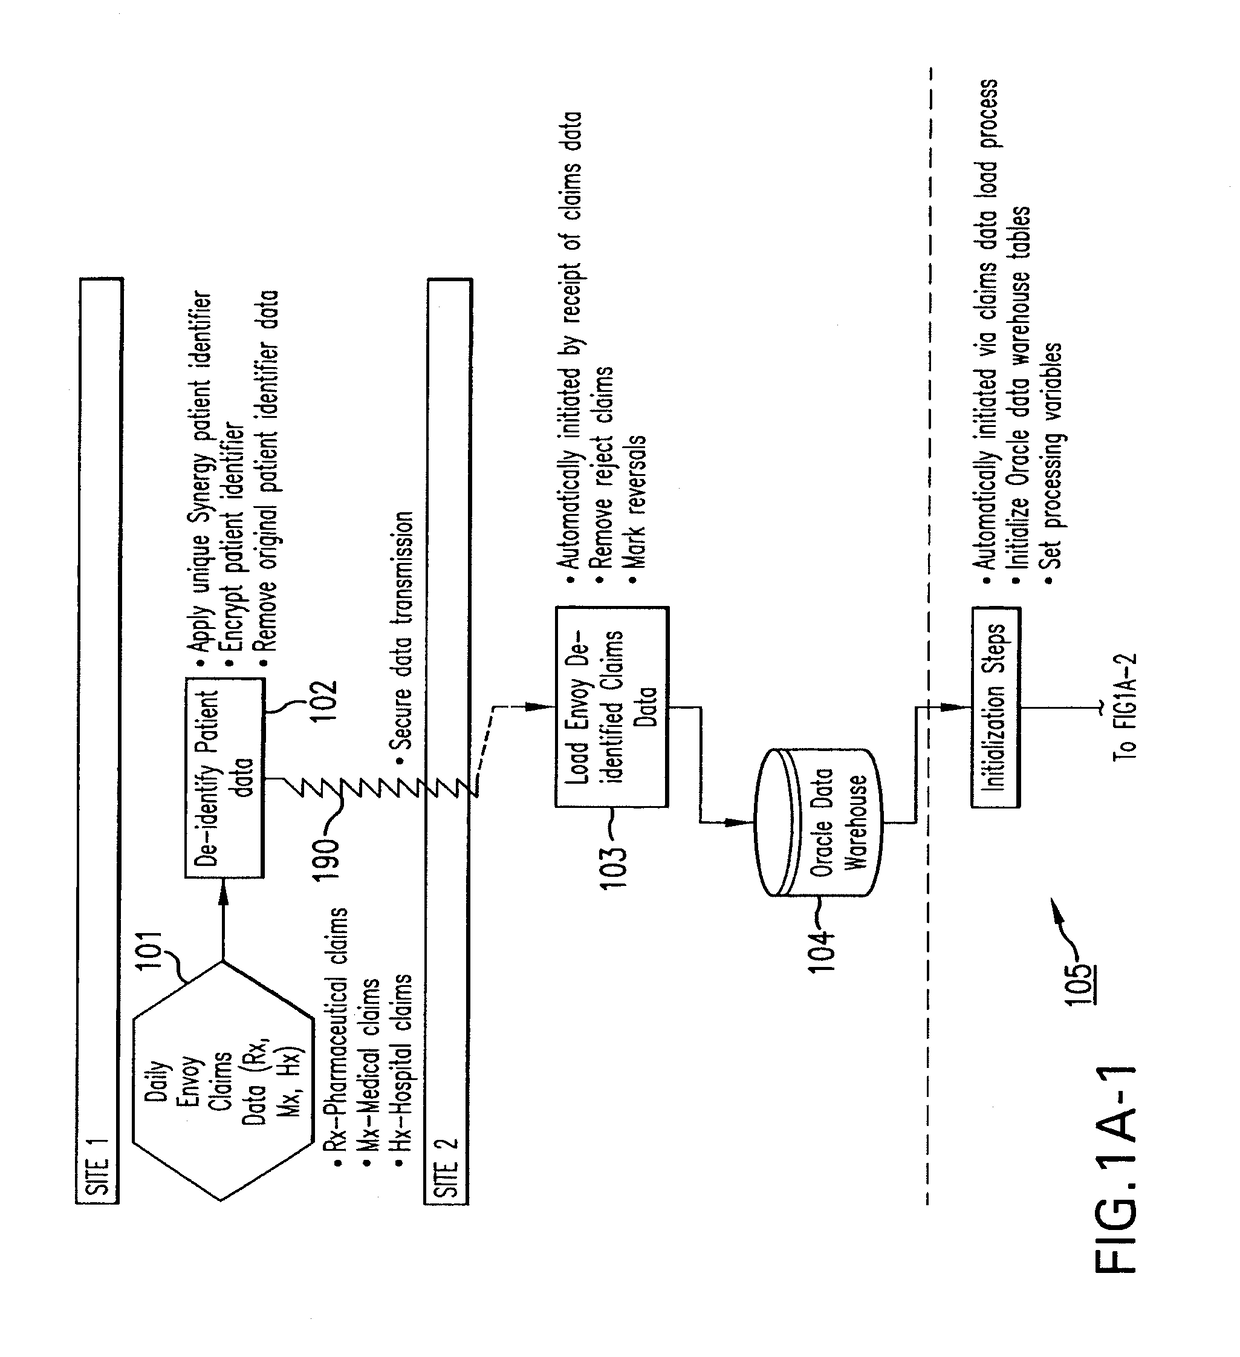 System and method for analyzing de-identified health care data